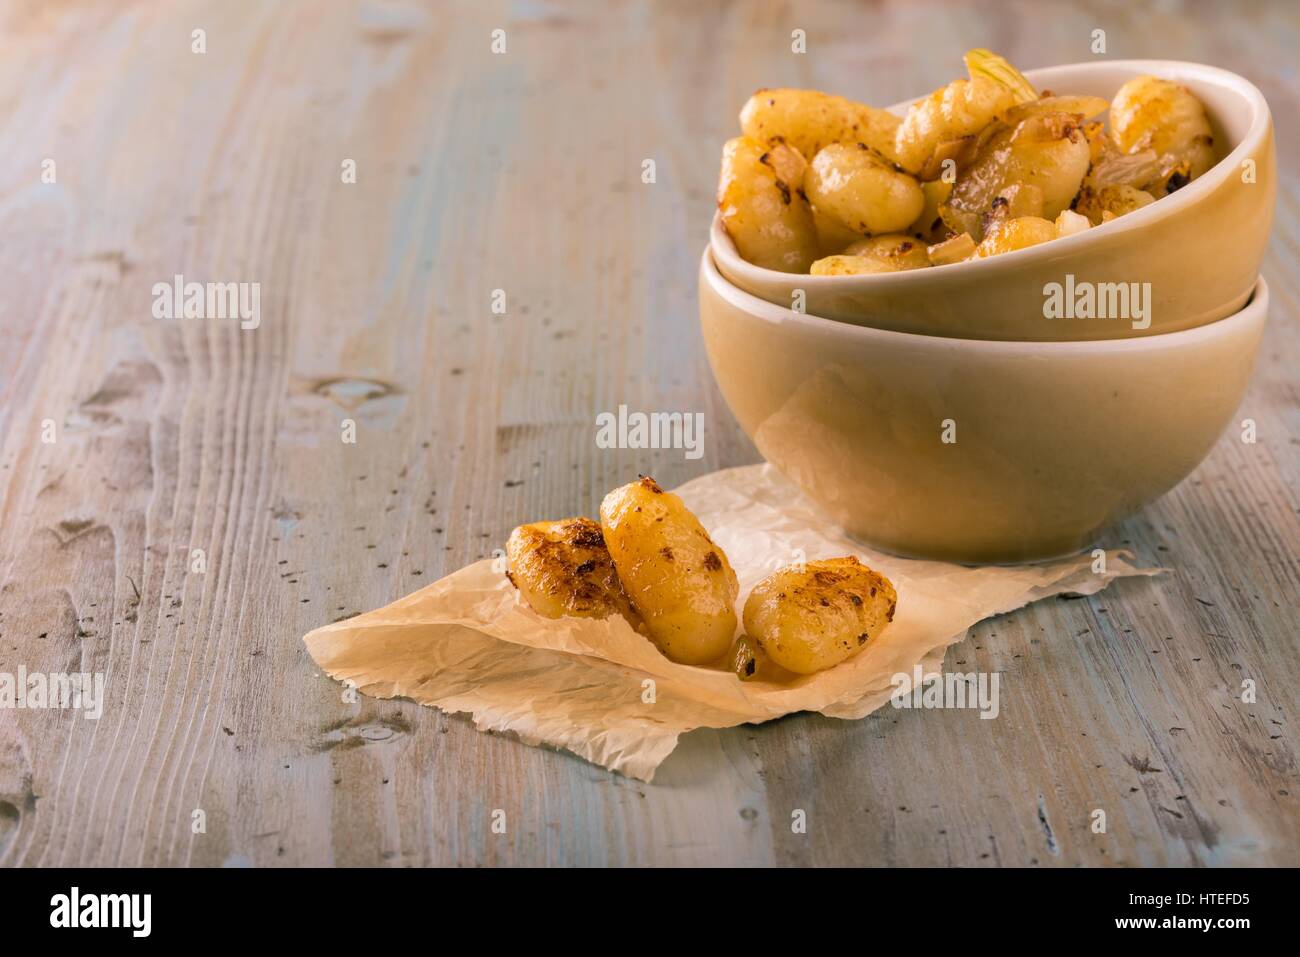 Horizontal photo of boiled and fried gnocchi on piece of paper in front of two bowls with single portion. Several pieces are served together with roas Stock Photo